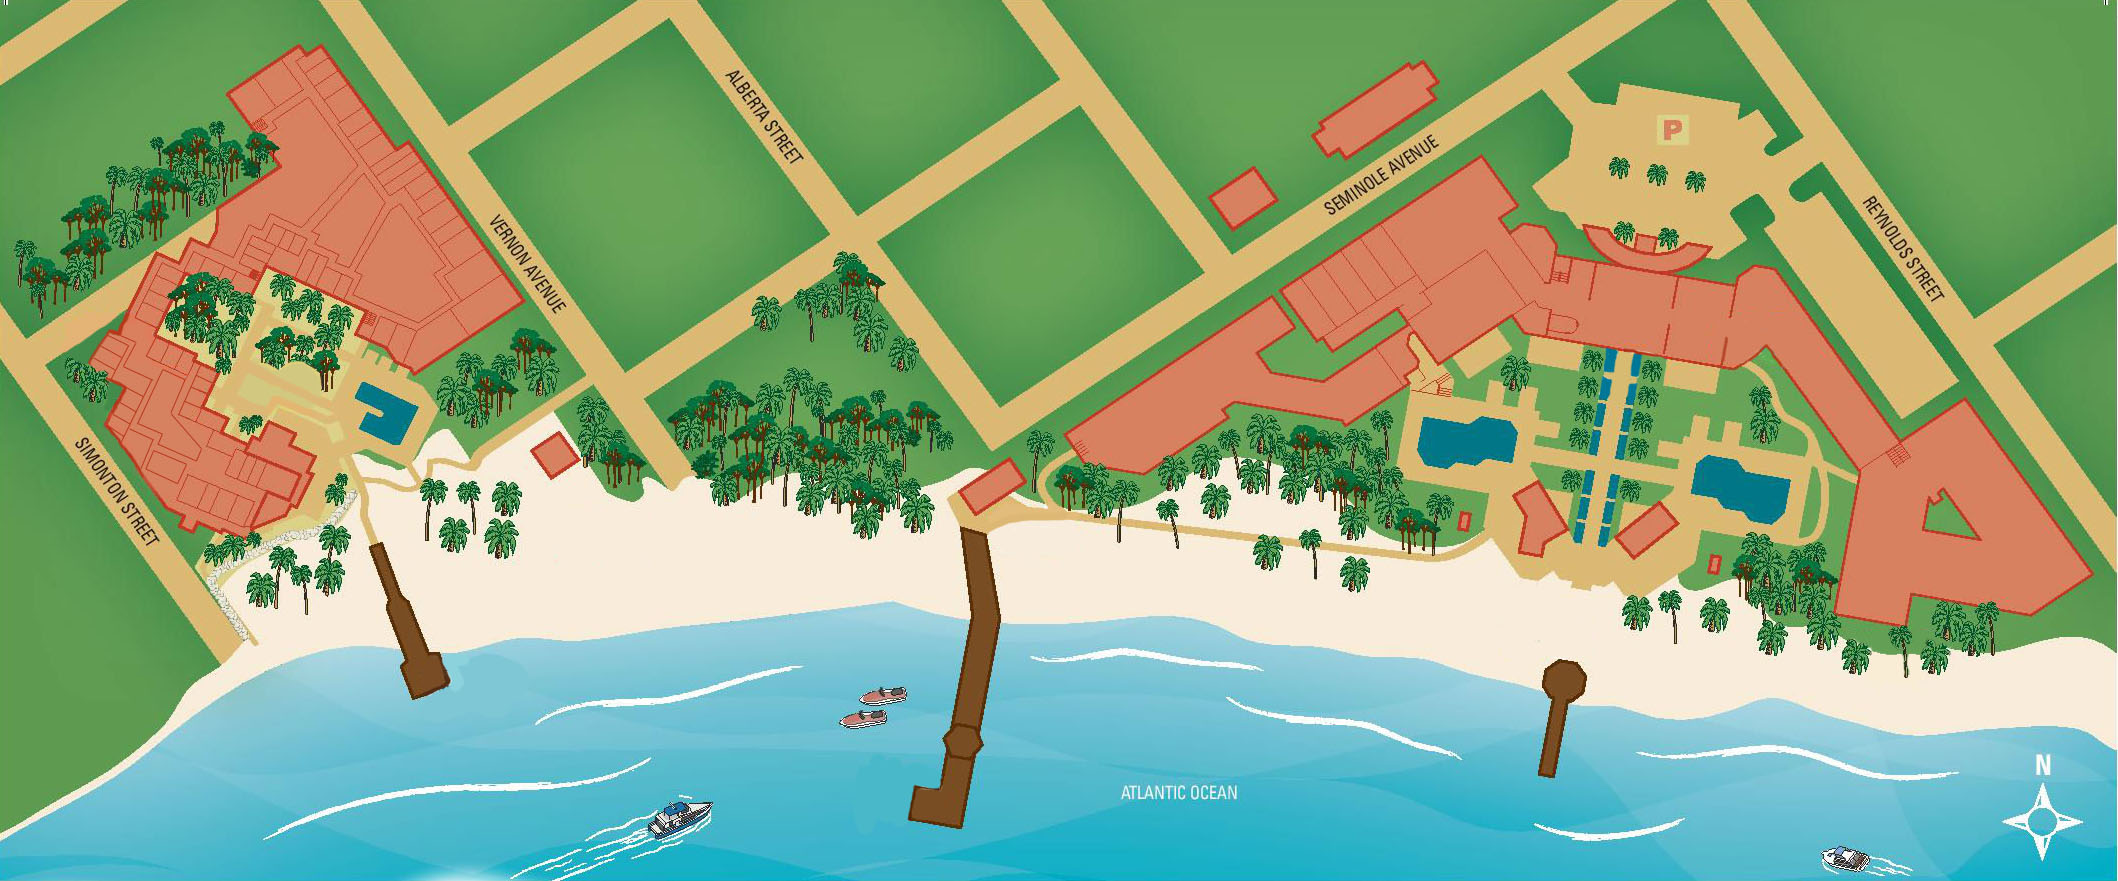 an illustration of the map for the beach area of the resort